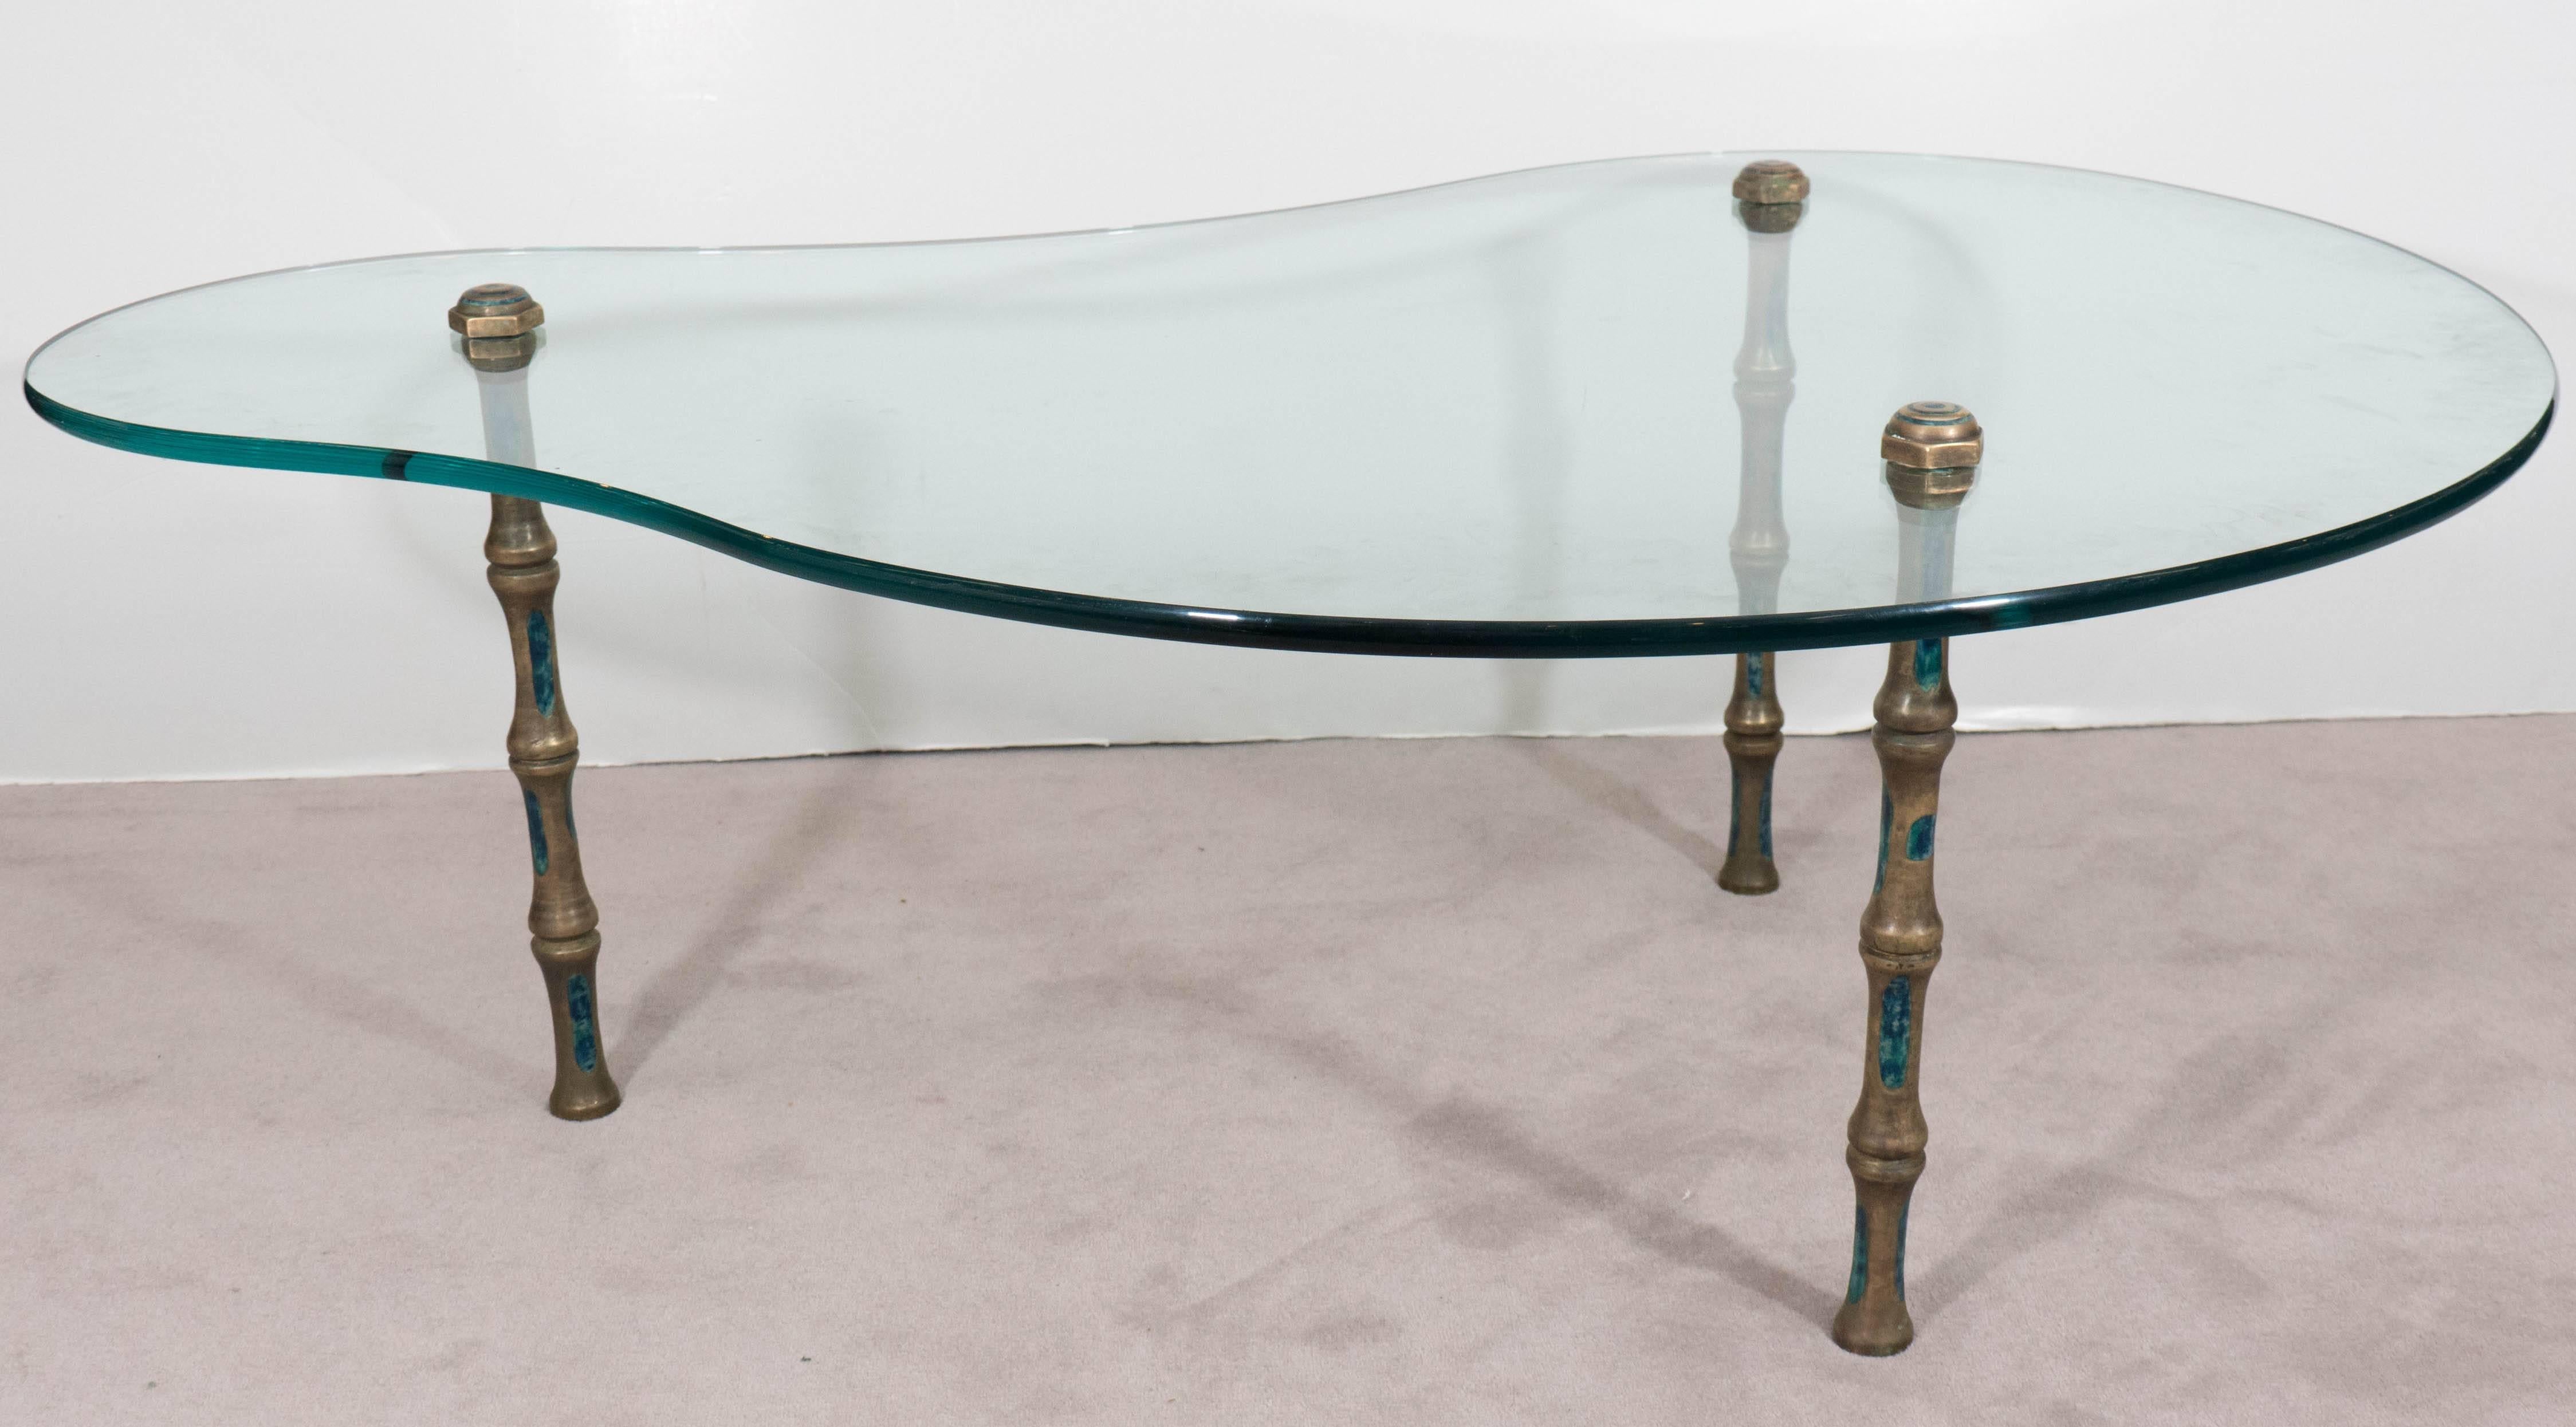 This coffee and cocktail table in the style of Mexican designer Pepe Mendoza, produced circa 1950-1960, includes a biomorphic shaped glass top, mounted on three bronze legs, as faux bamboo stalks, inlaid with enameled turquoise ceramic. Very good